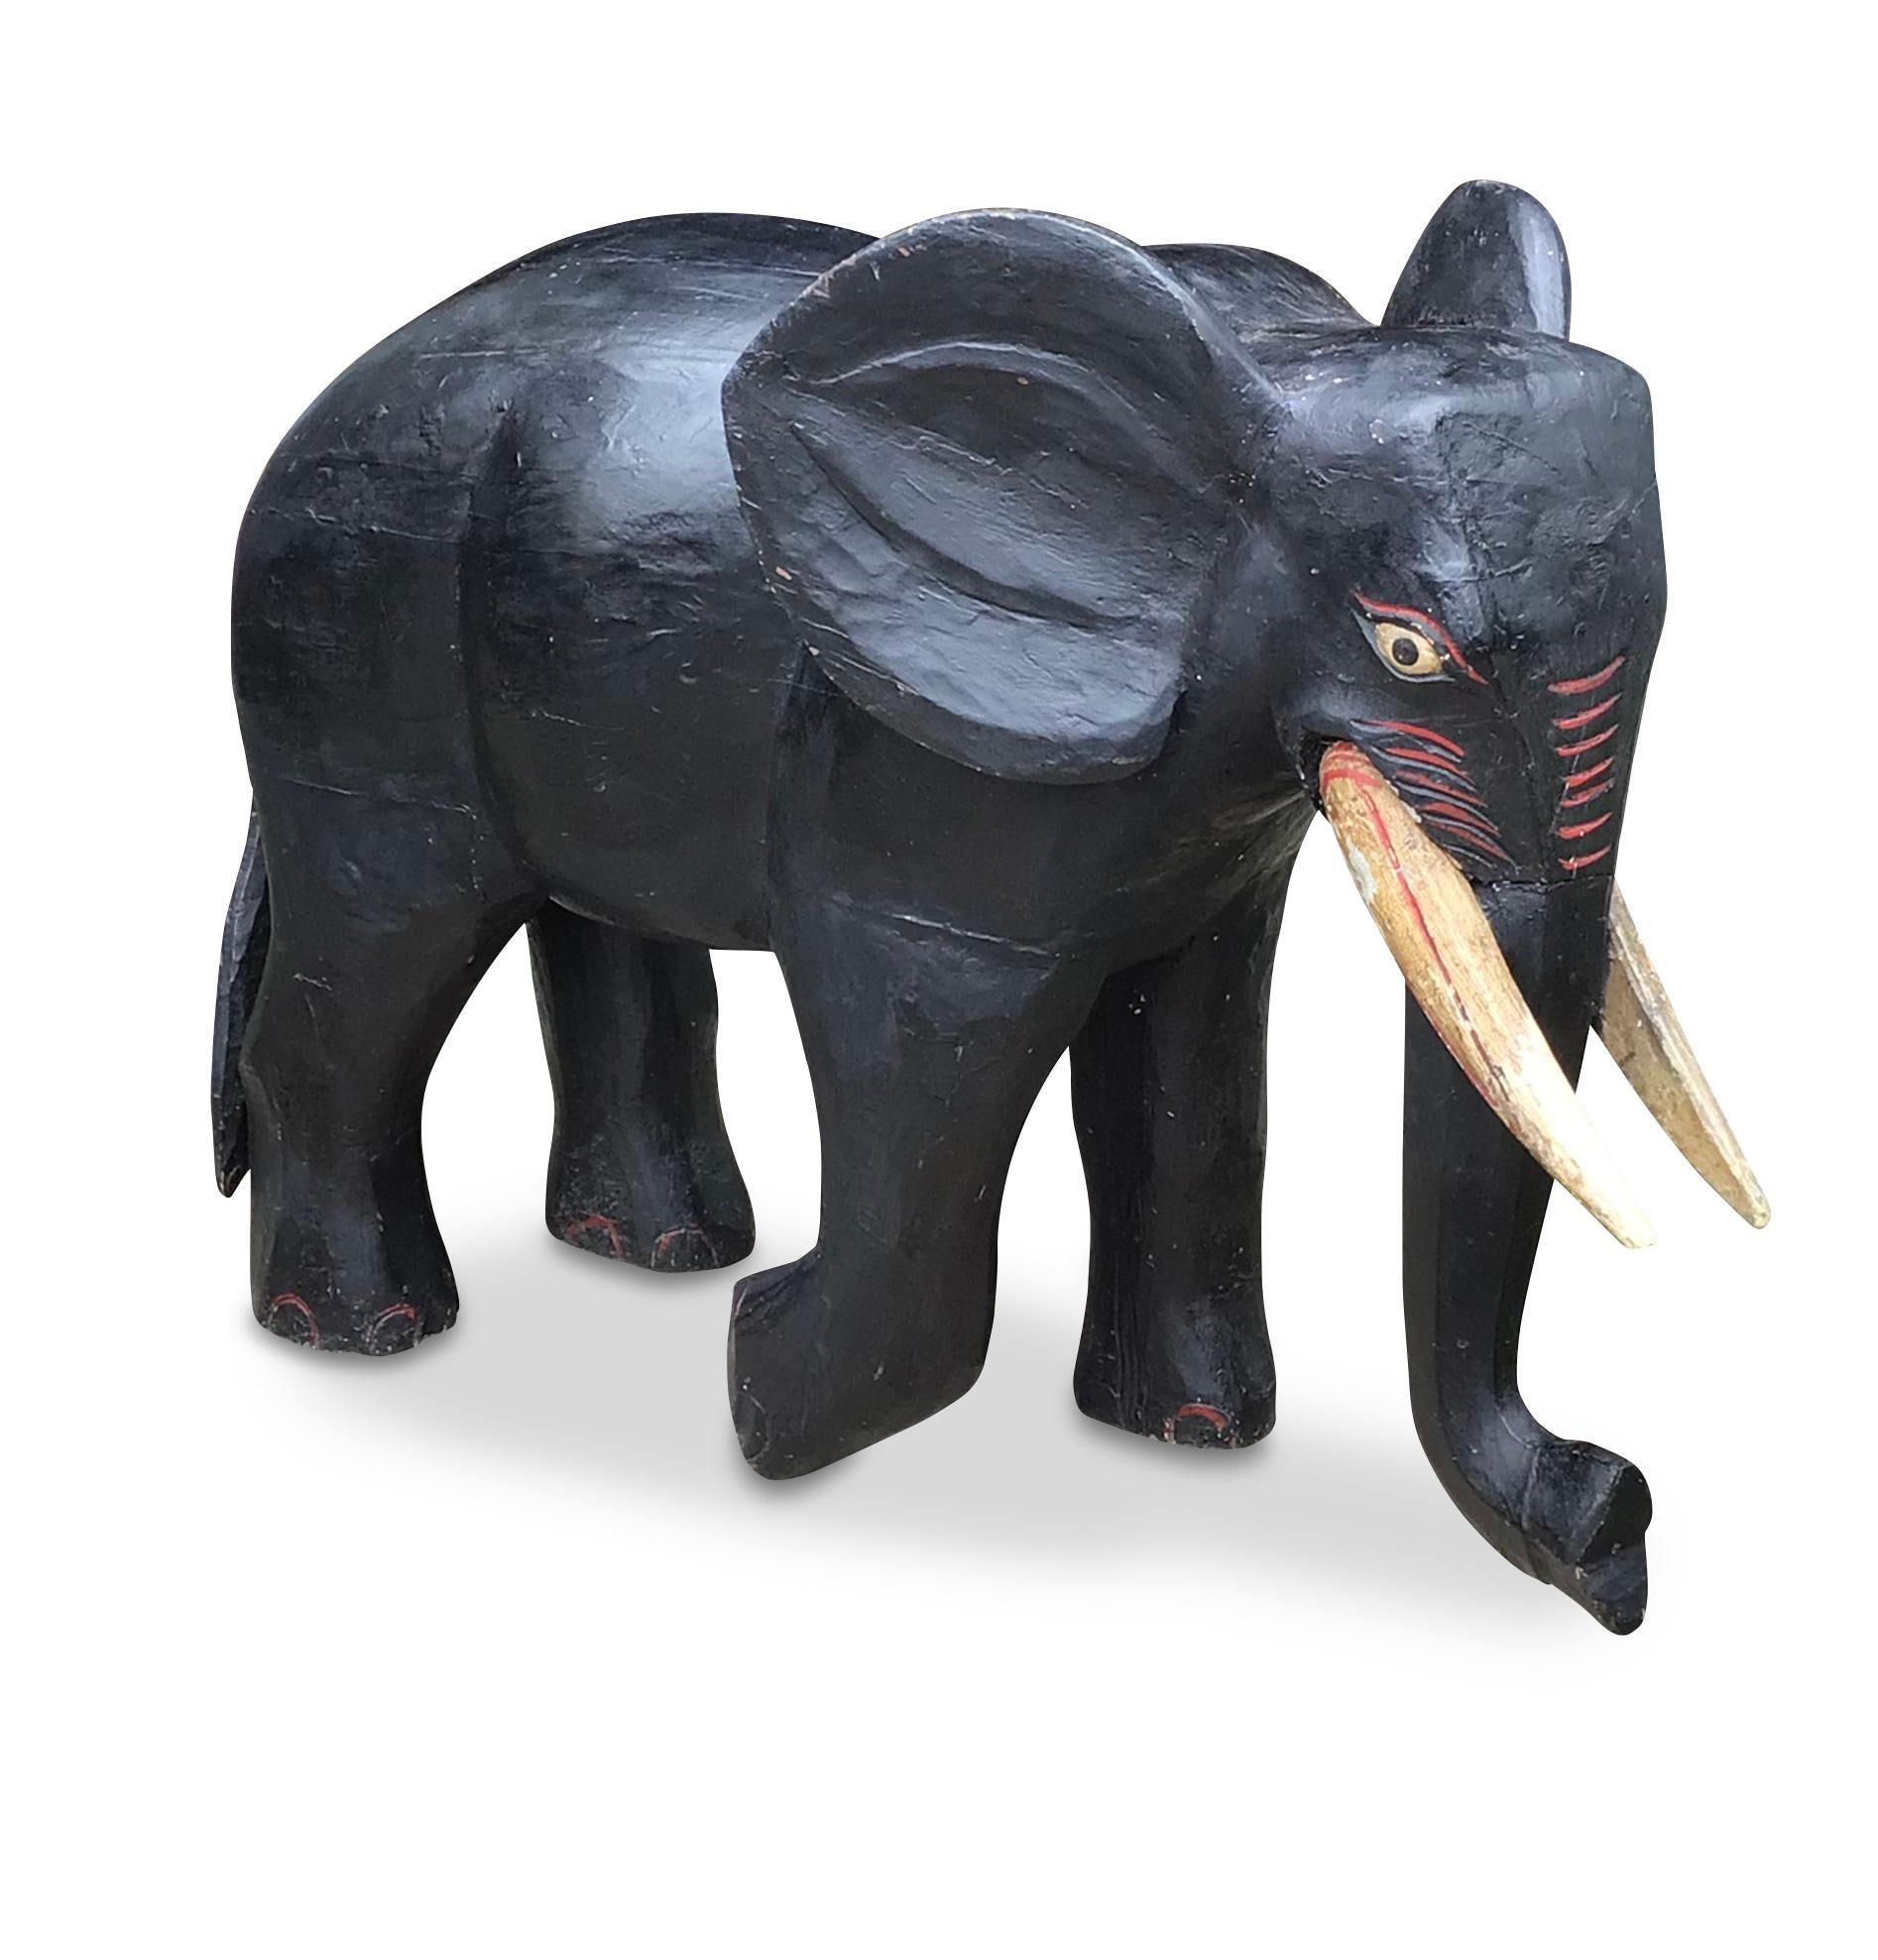 Early C20th unusual large carved wood sculpture of an elephant, with head turned slightly to right in a waking stance and one foot at rest, still retains its original decoration and charming paintwork to his face. A wonderfully fun and decorative